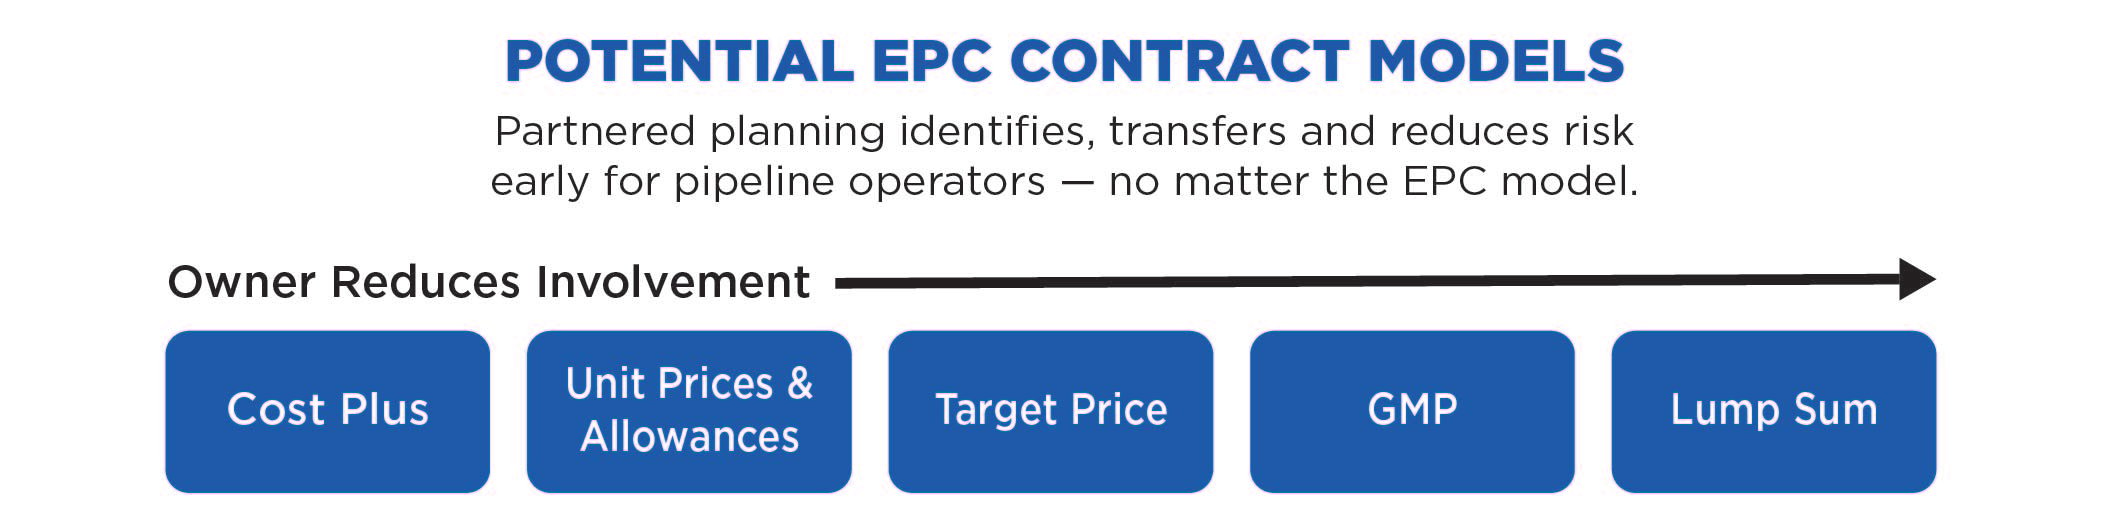 POTENTIAL EPC CONTRACT MODELS